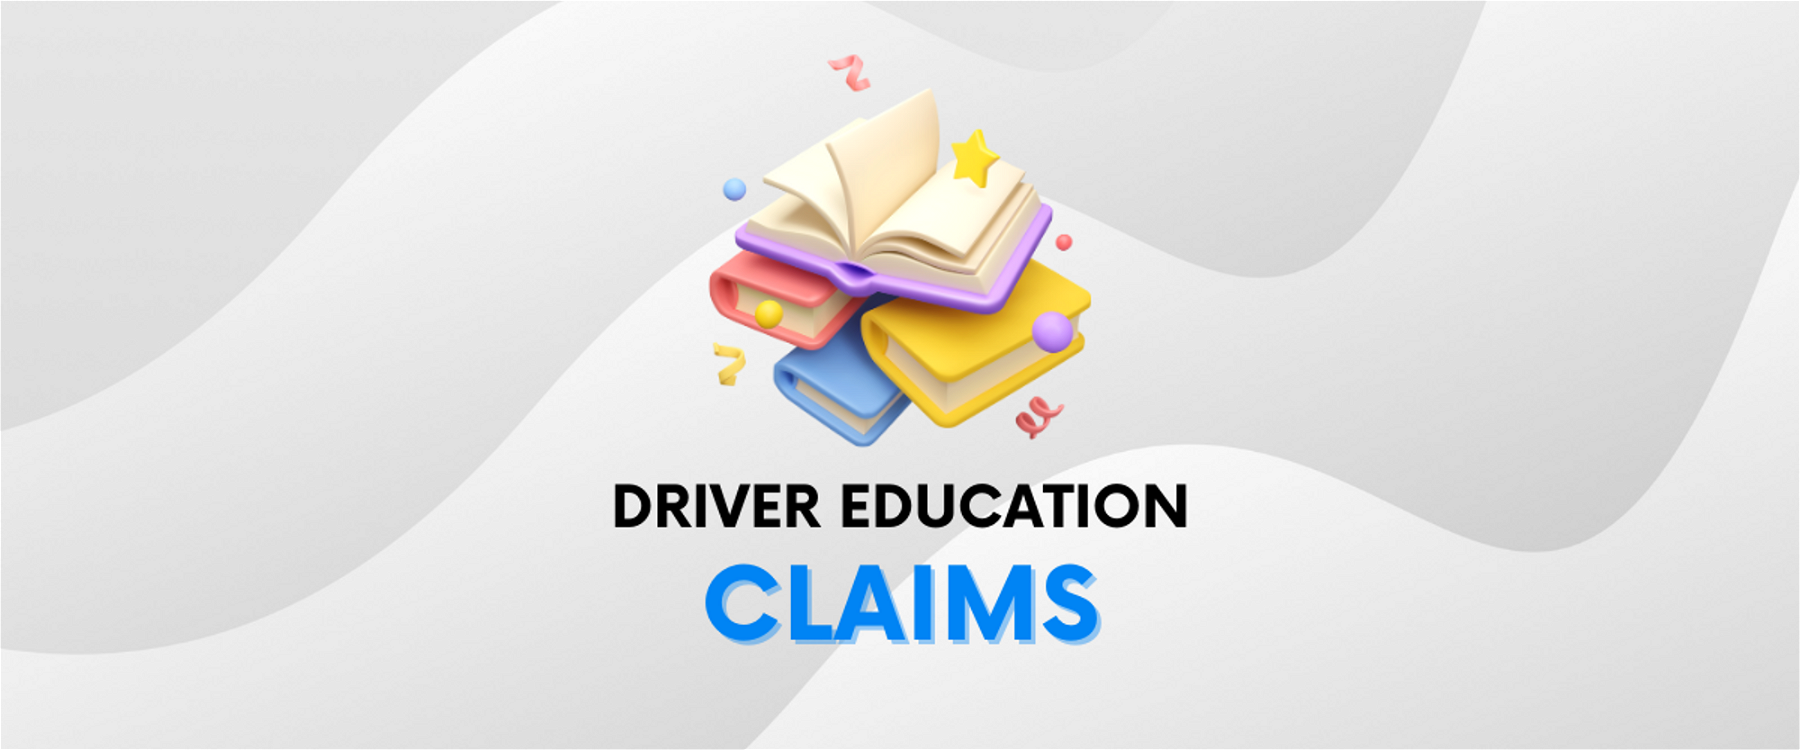 About Claims